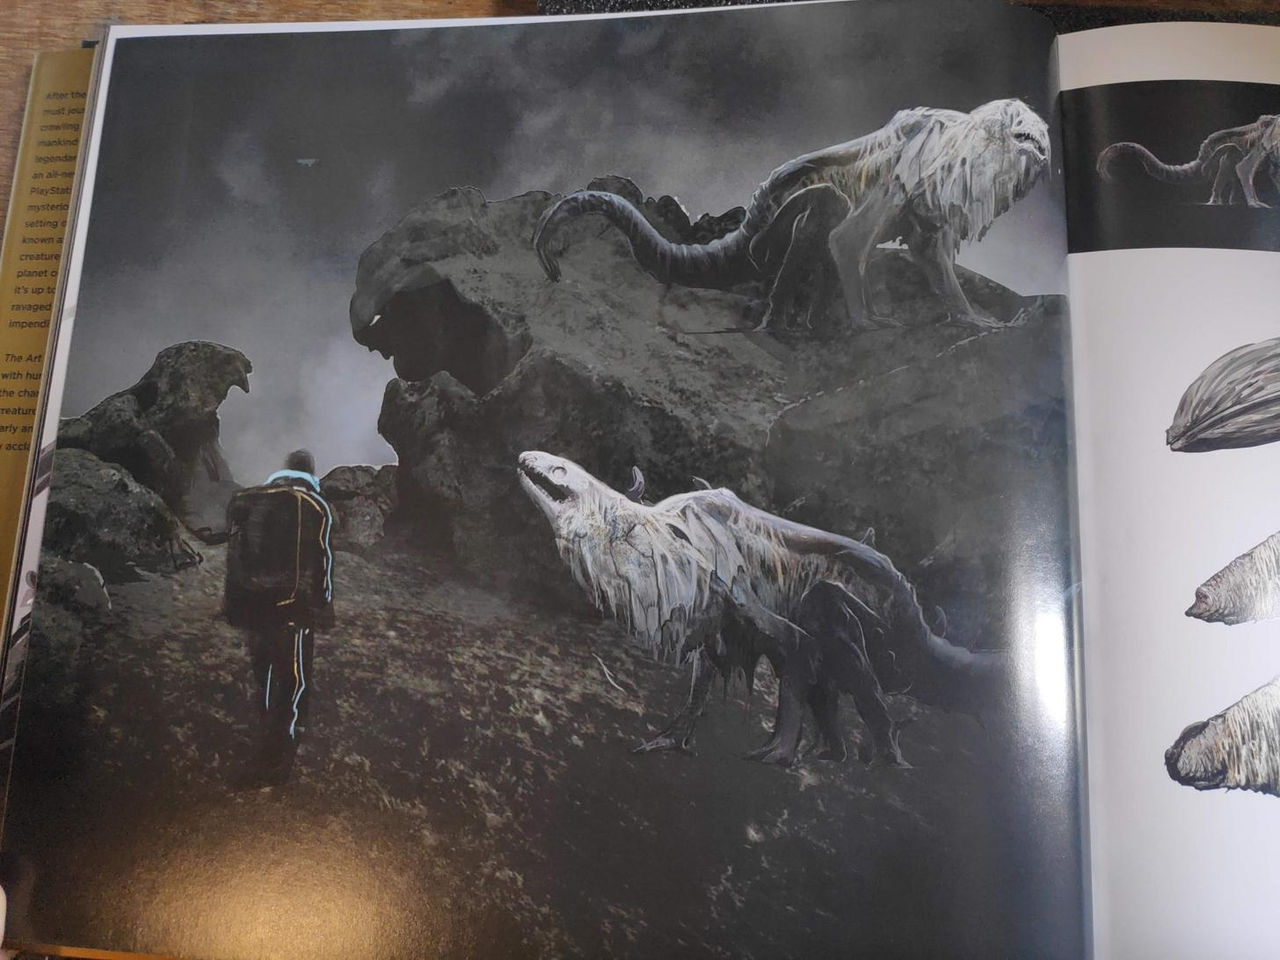 First images from the book of illustrations that explores the origin of Death Stranding